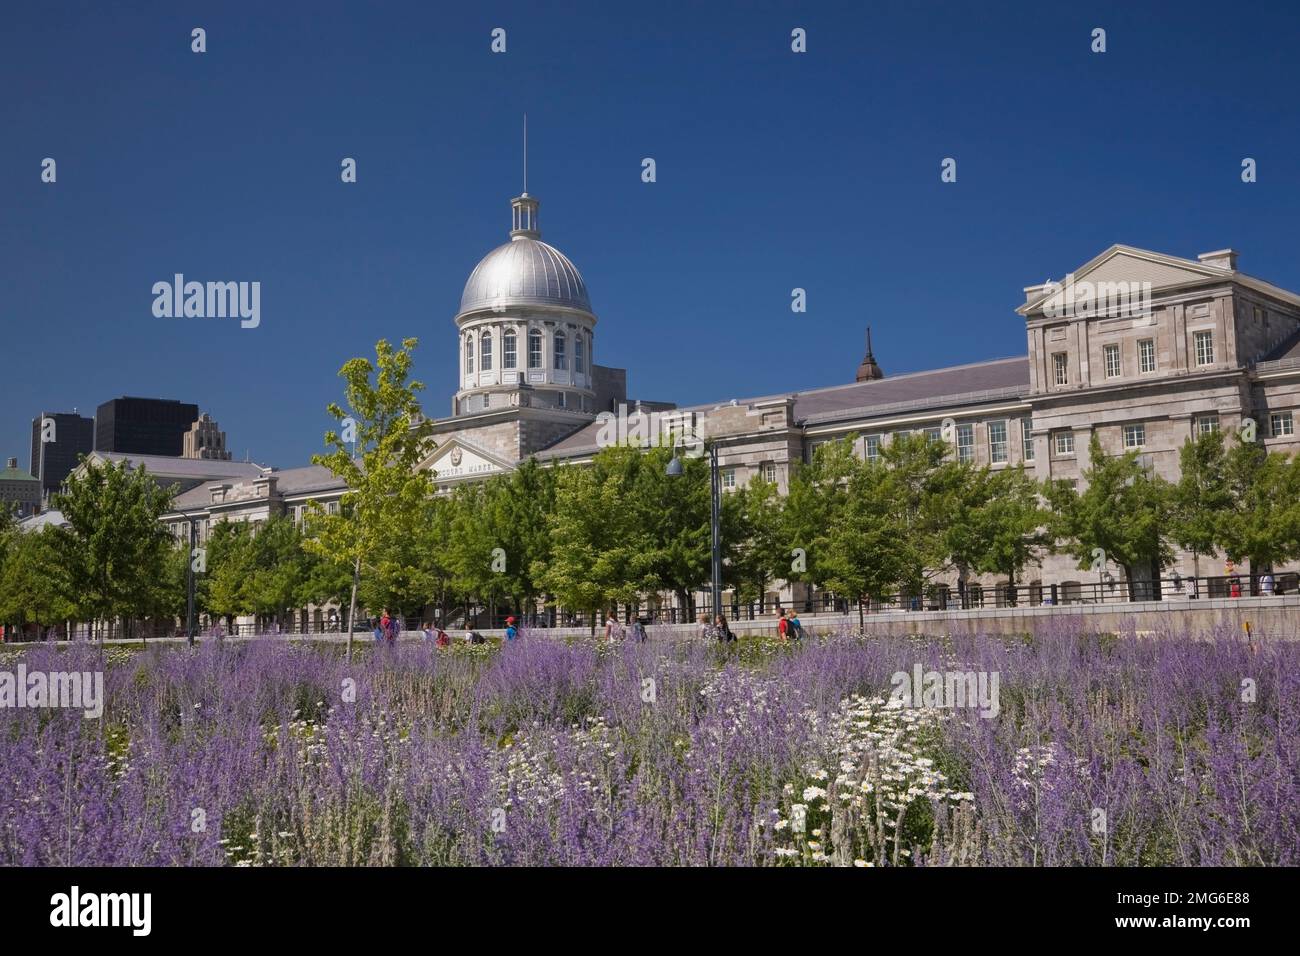 Field of lilac colored flowers and Bonsecours Market in summer, Old Montreal, Quebec, Canada. Stock Photo